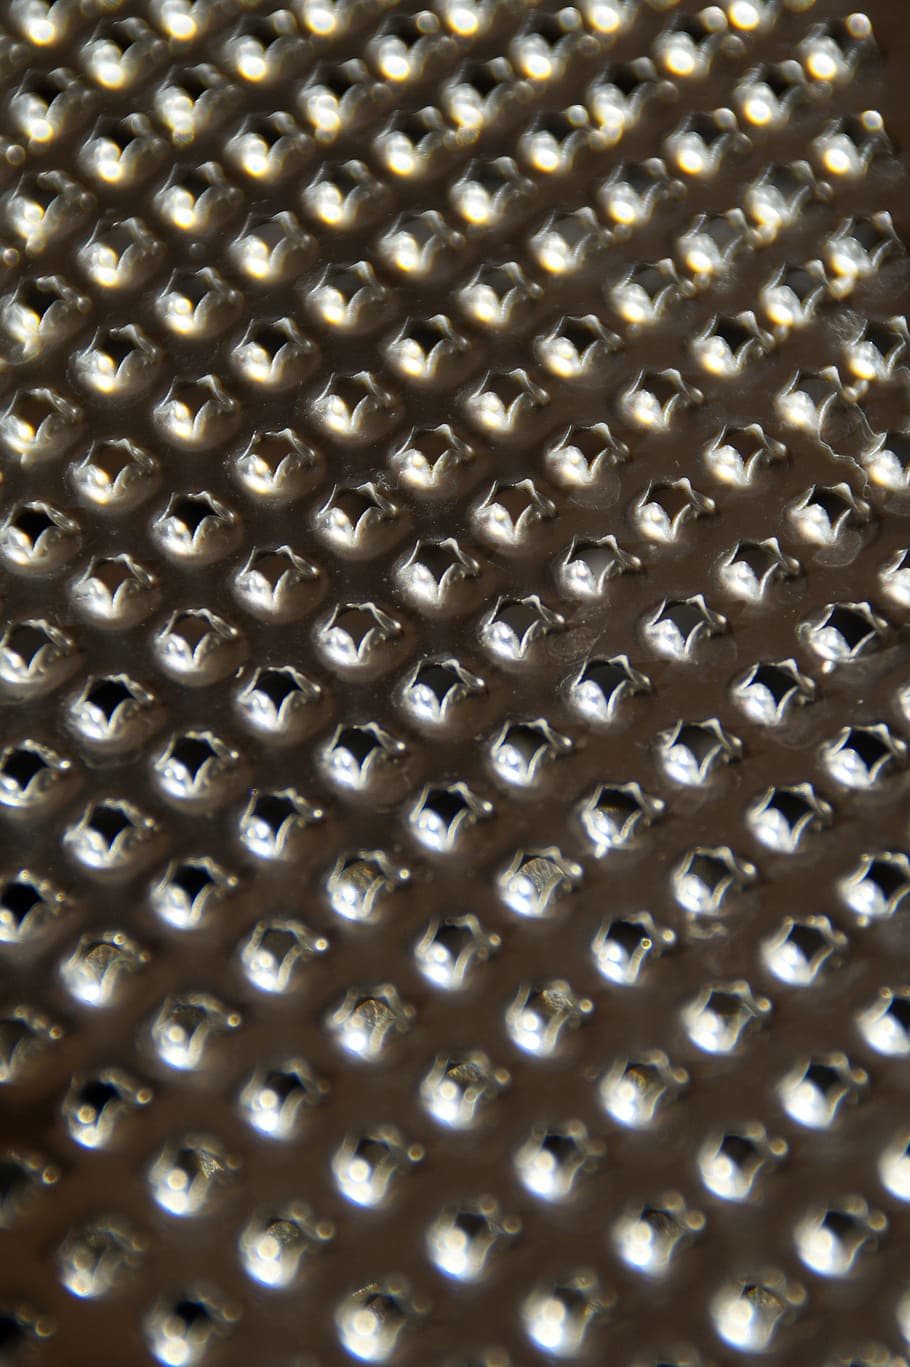 structure, background, grater, cheese grater, vegetable grater, planer, metal, holey, pattern, backgrounds